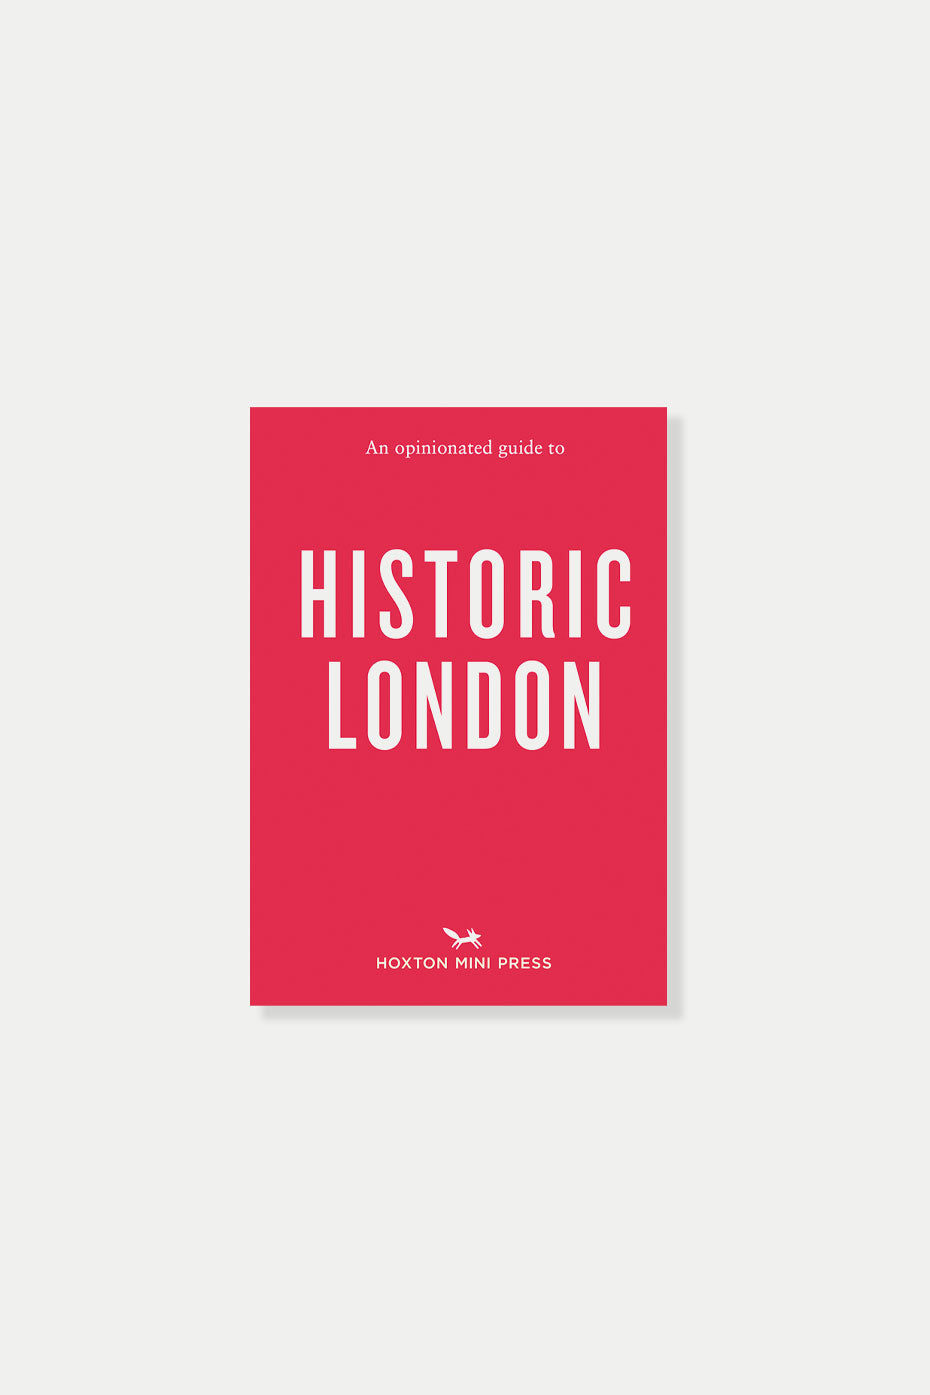 Turnaround Books An Opinionated Guide To Historic London By Hoxton Mini Press